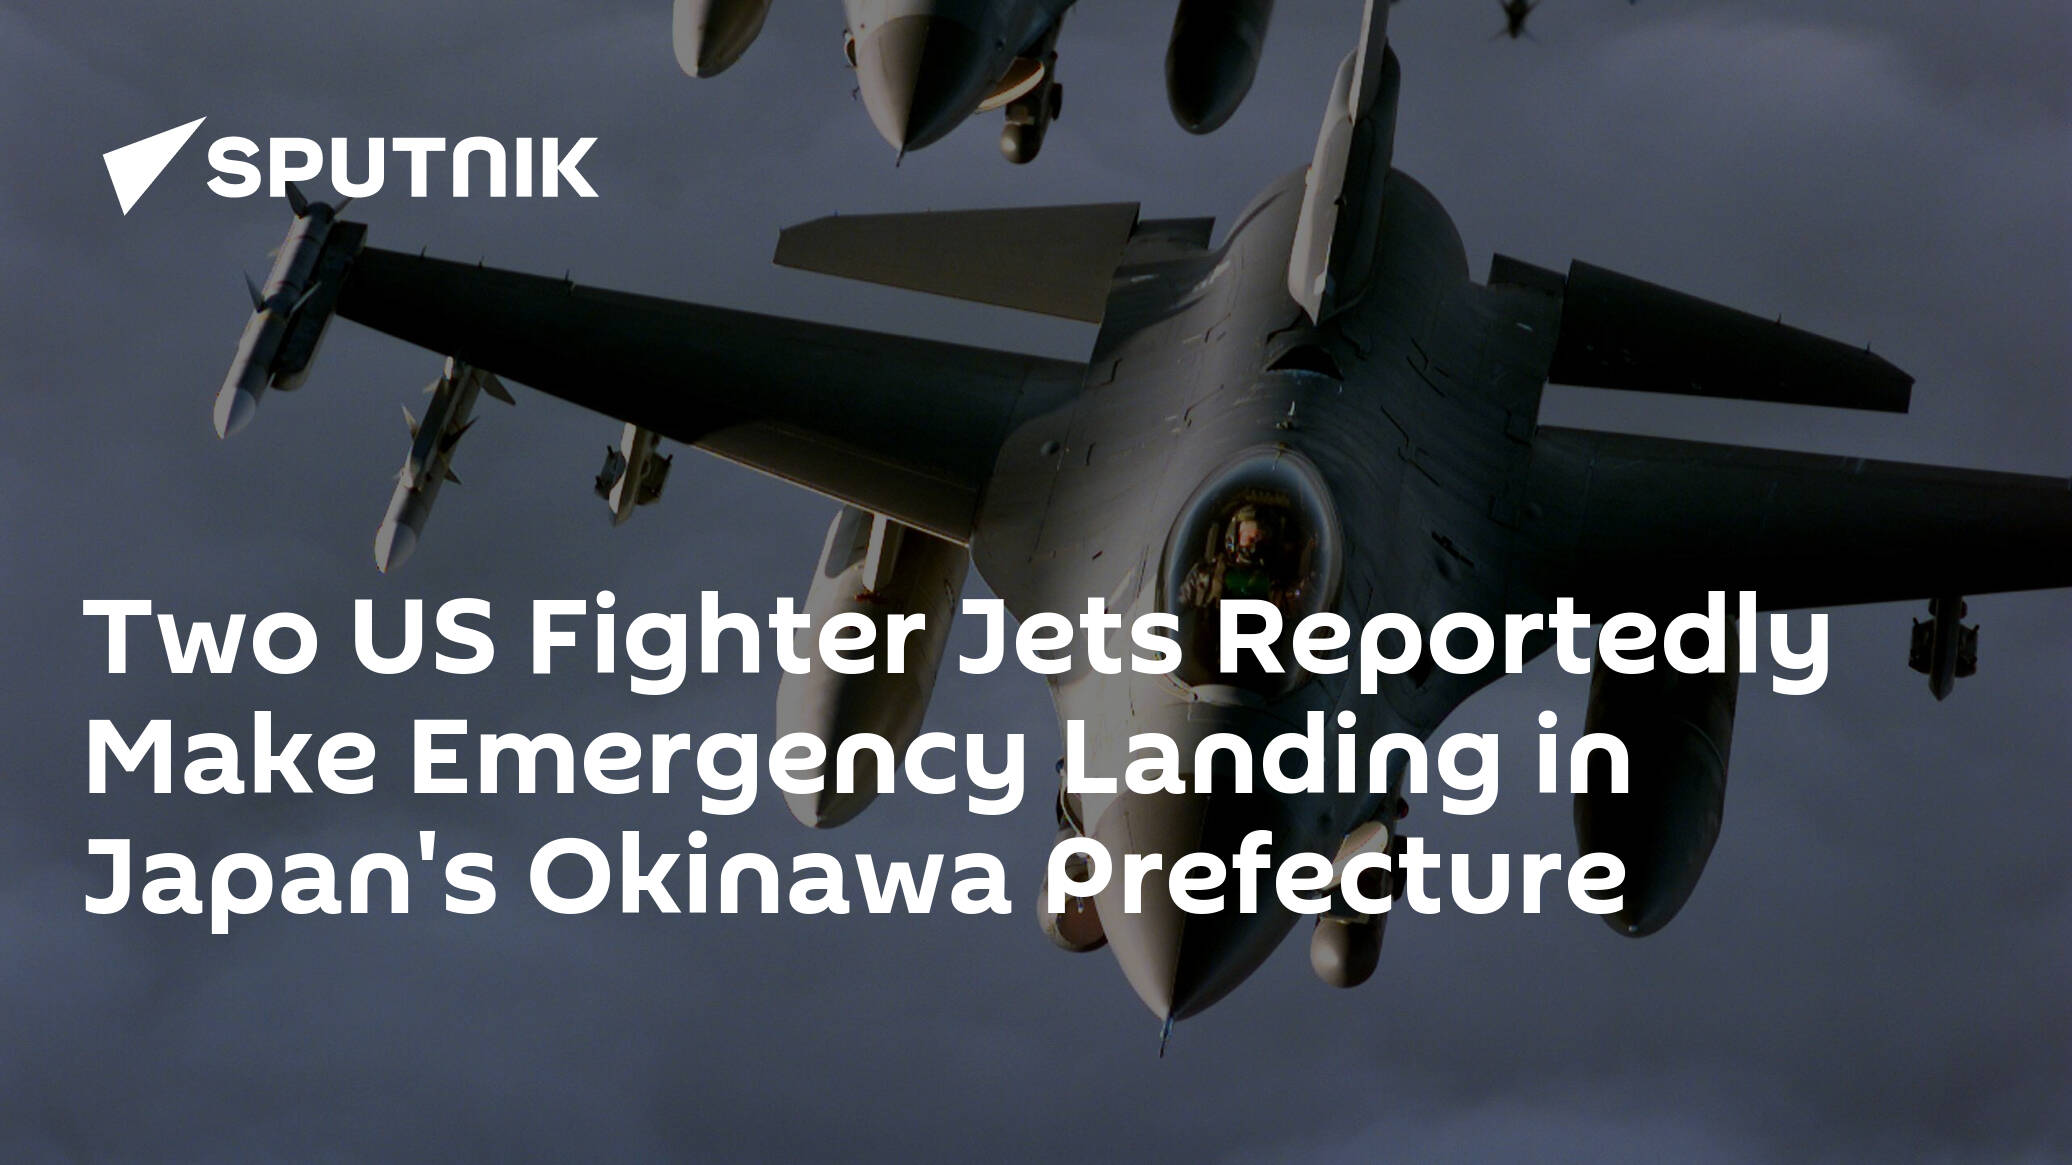 Two US Fighter Jets Reportedly Make Emergency Landing in Japan's Okinawa Prefecture